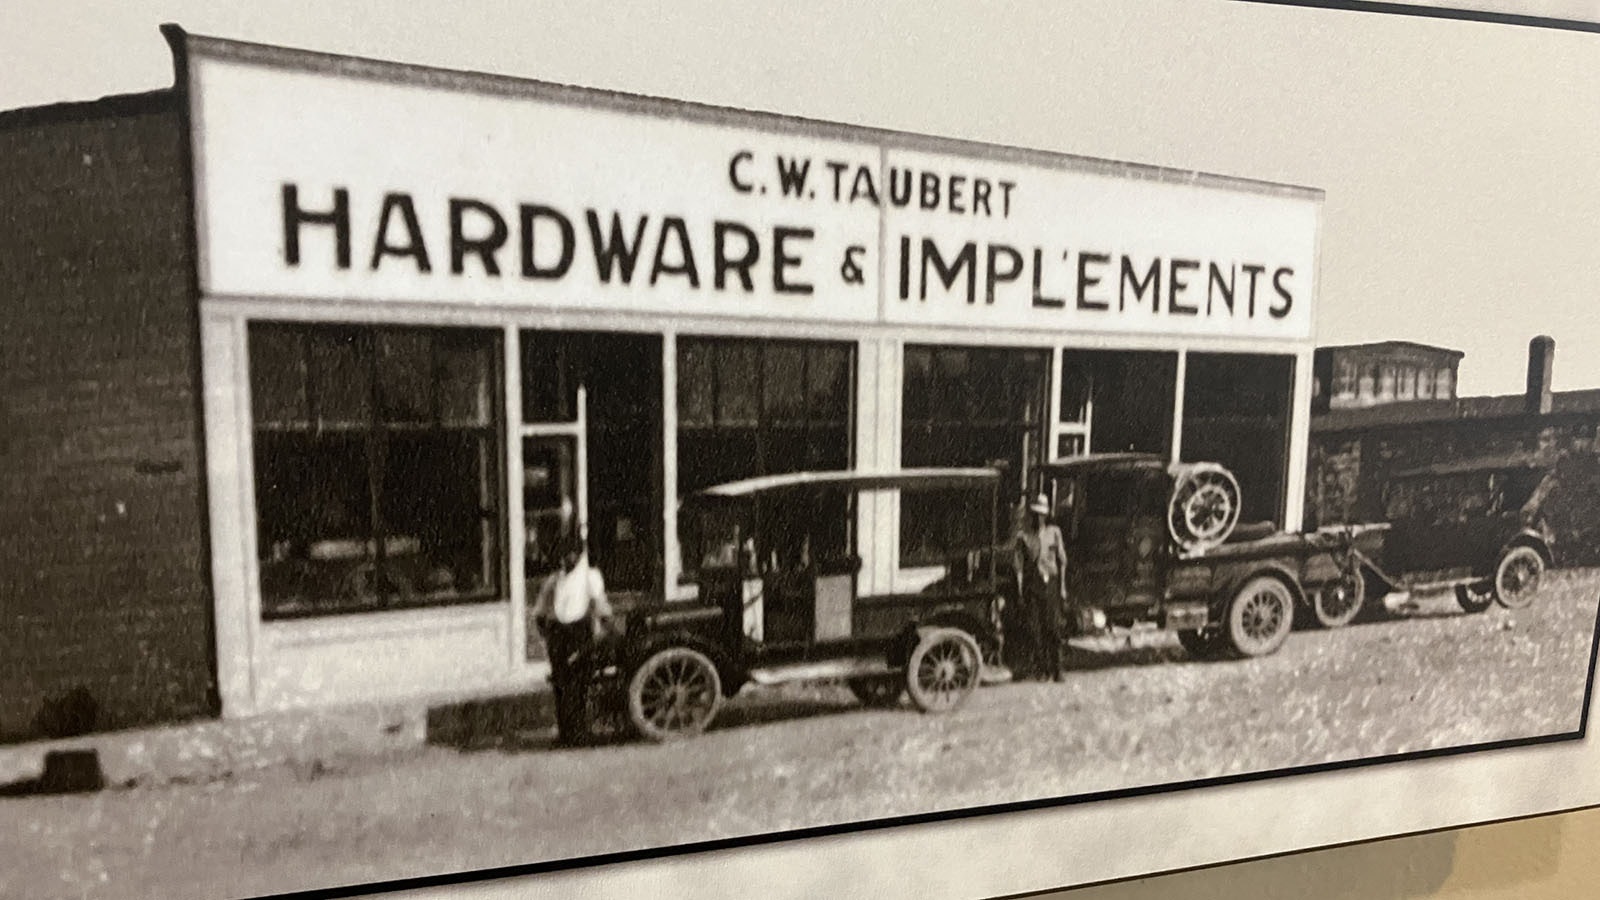 A photo on the wall at Lou Taubert Ranch Outfitters shows the Fort Laramie, Wyoming store where C.W. Taubert launched the retail business in 1919.